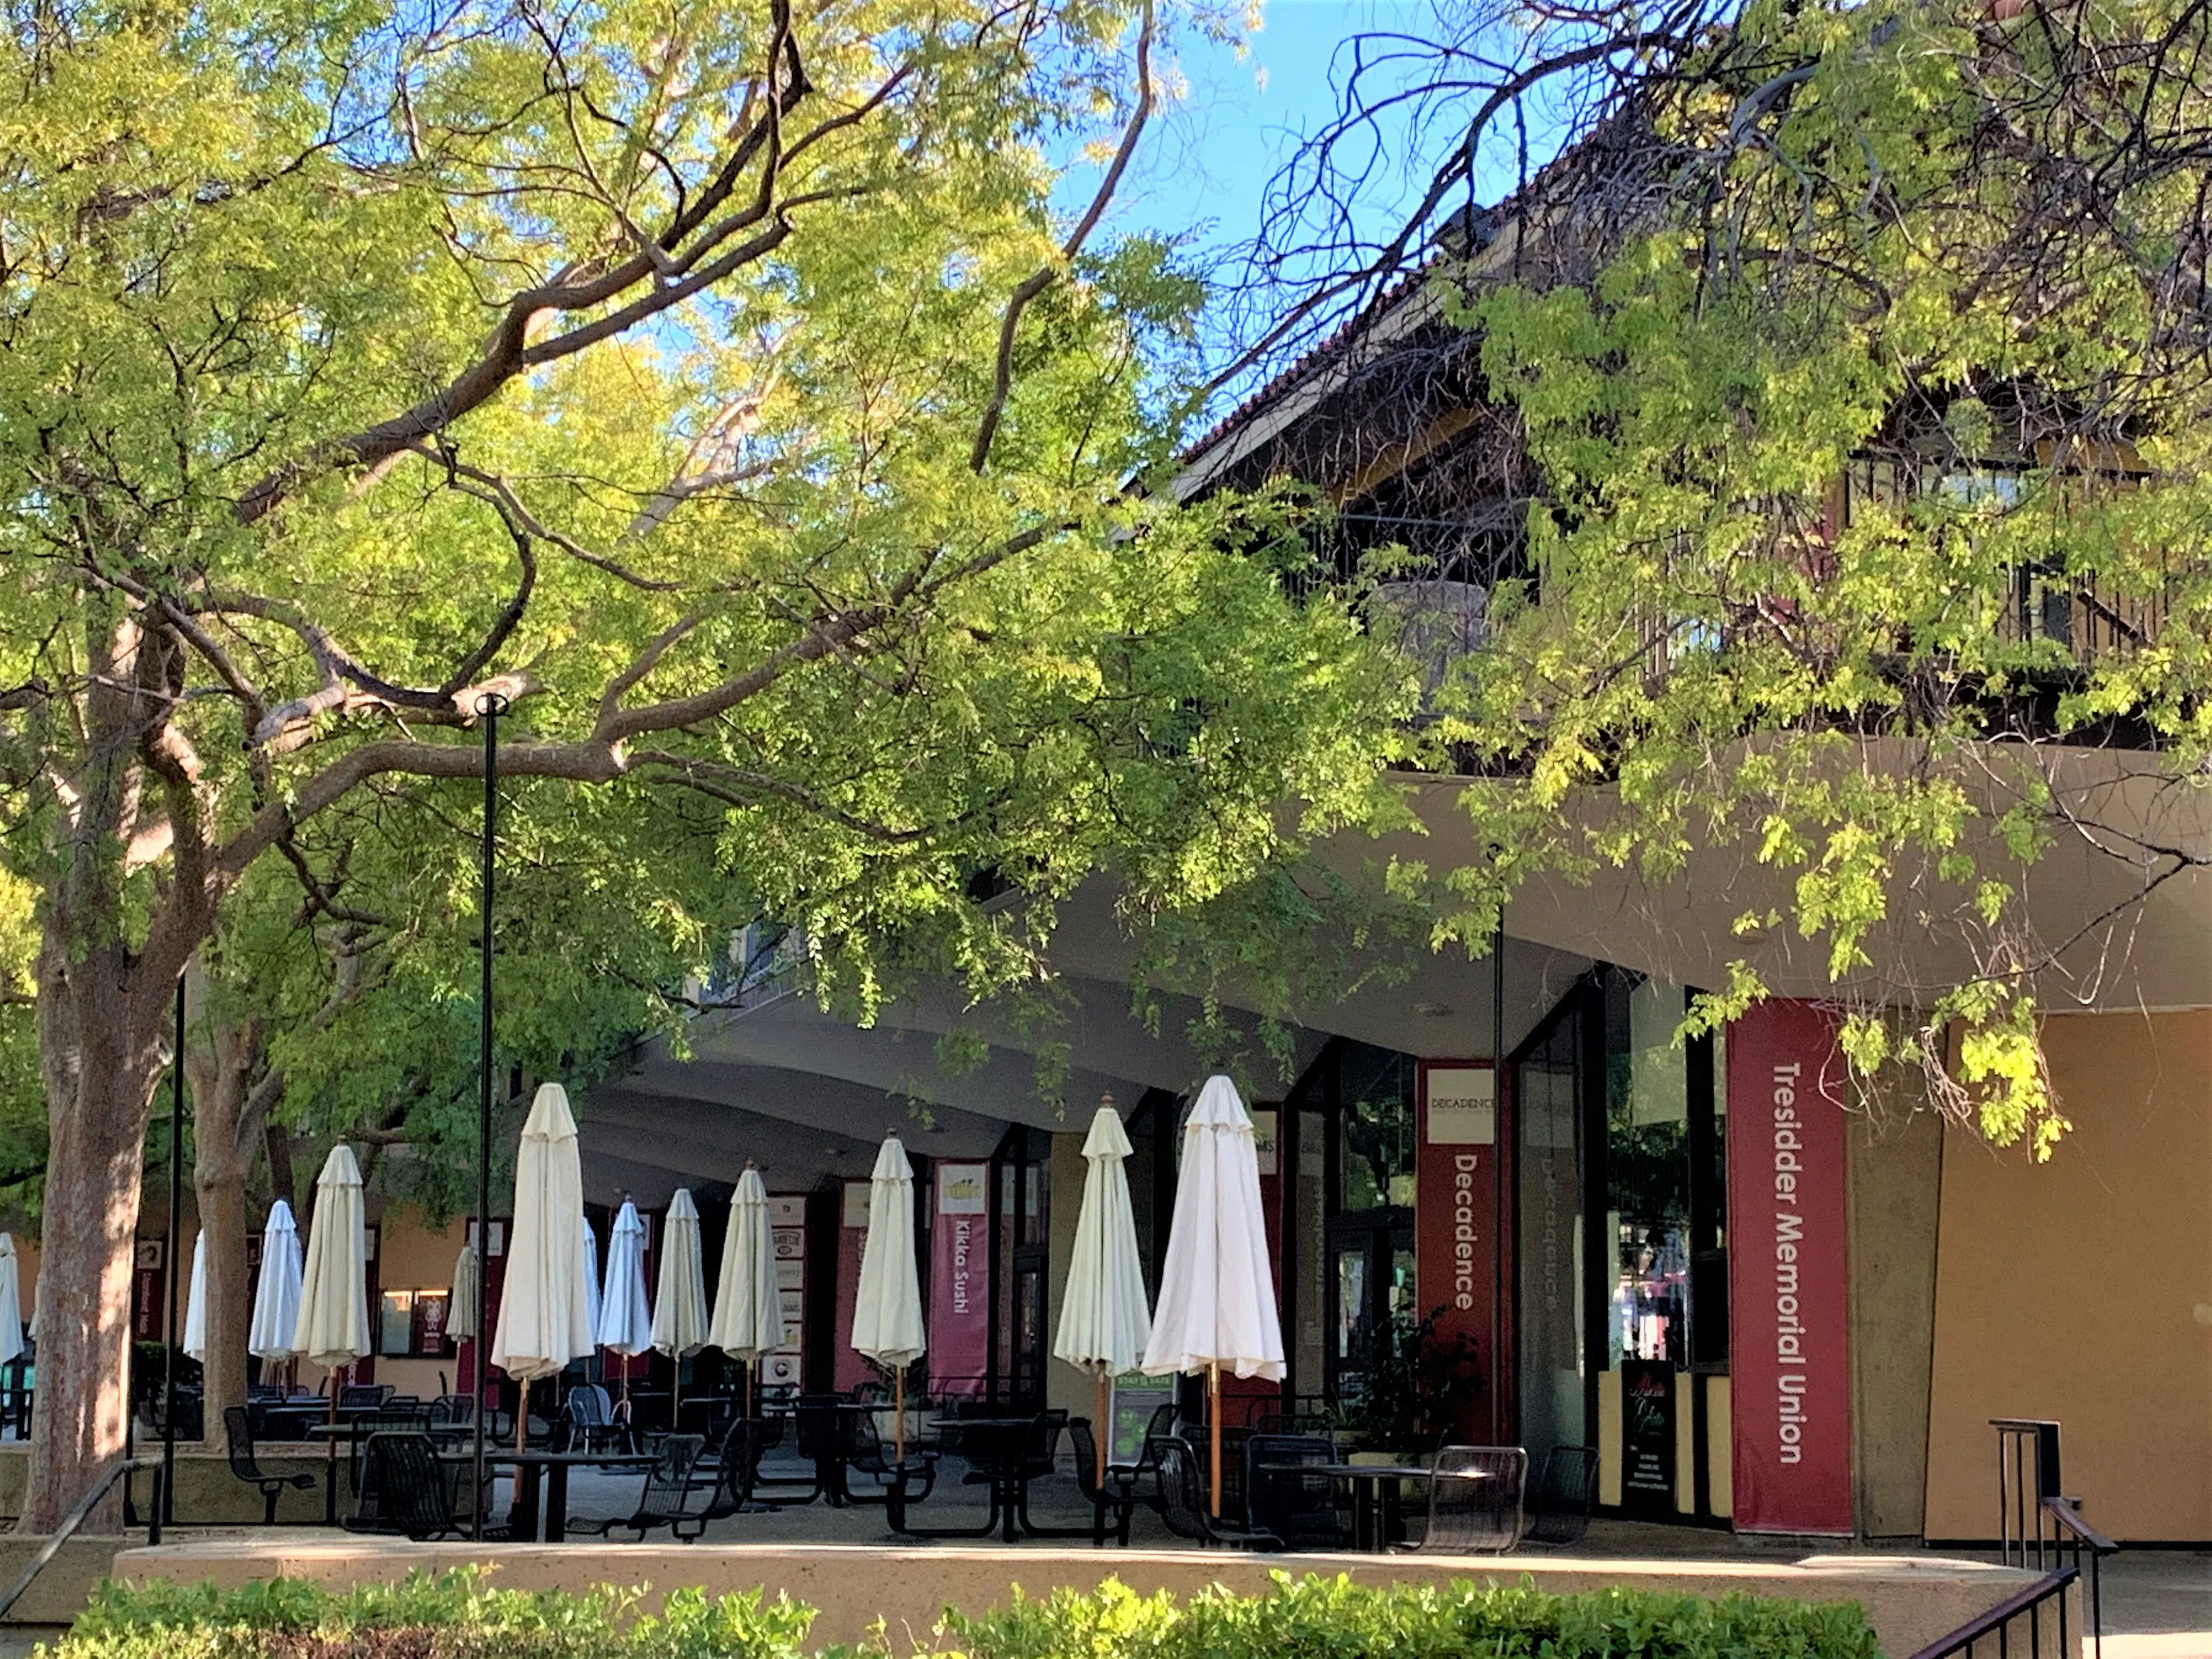 Two-story building and outdoor patio with trees surrounding and a seating area with tables and umbrellas.